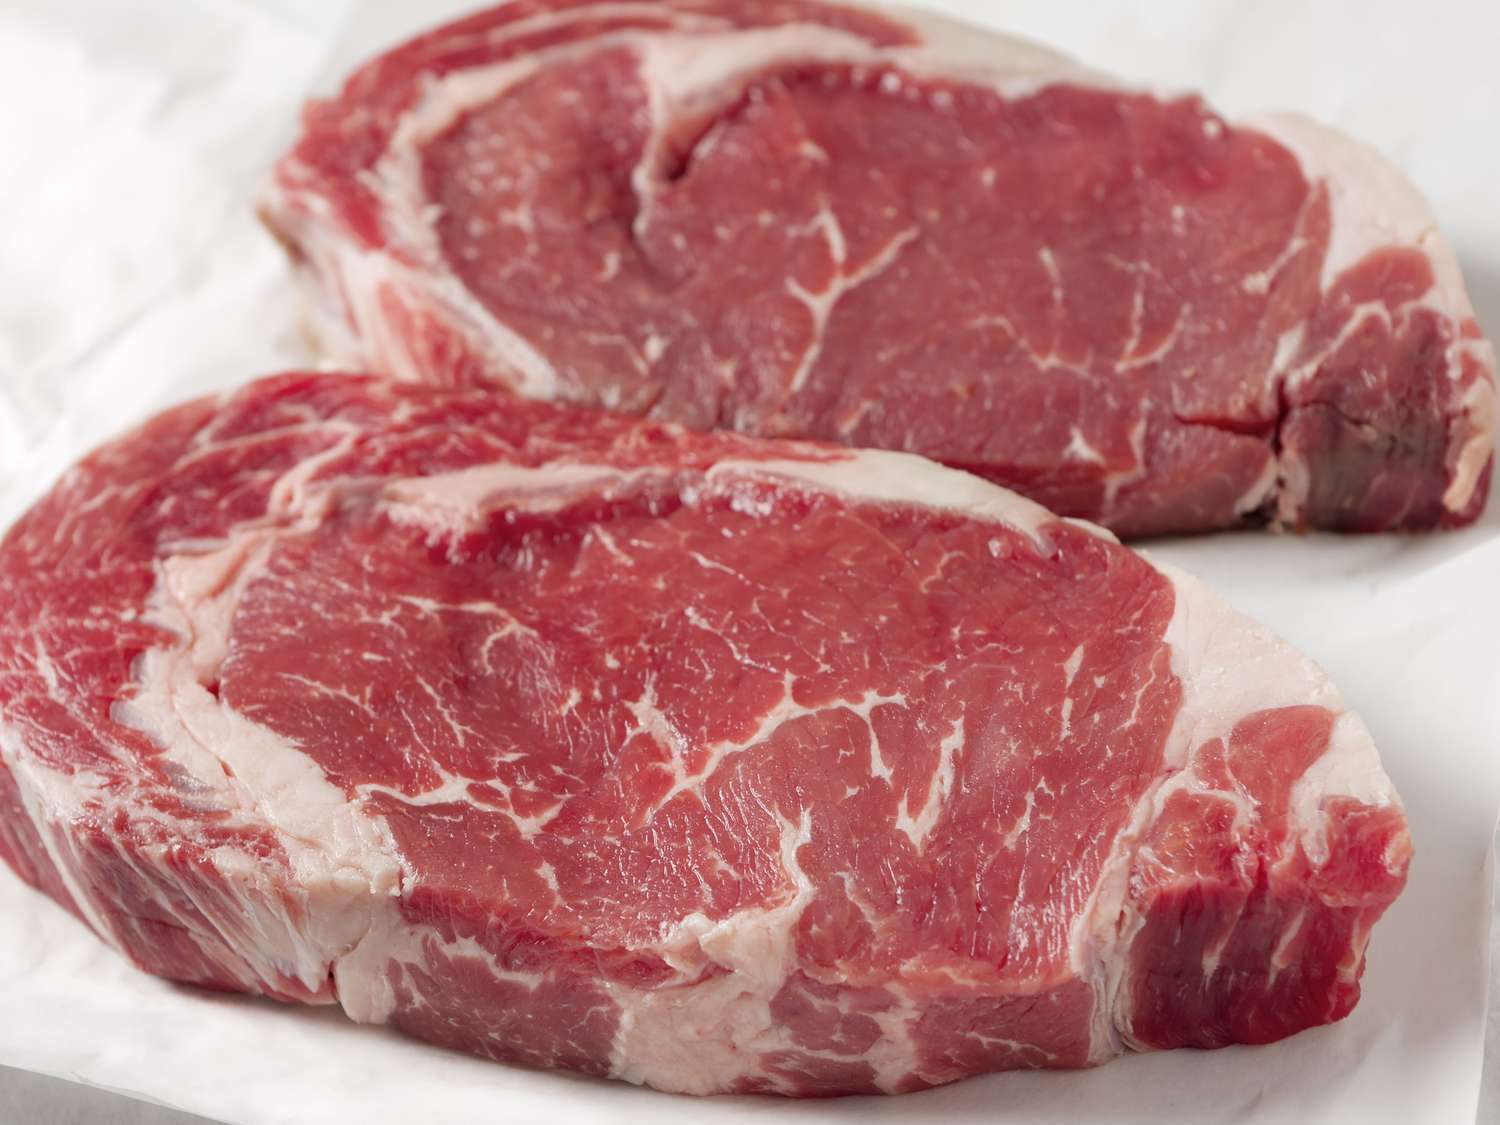 Sirloin vs Ribeye: What’s the differences?